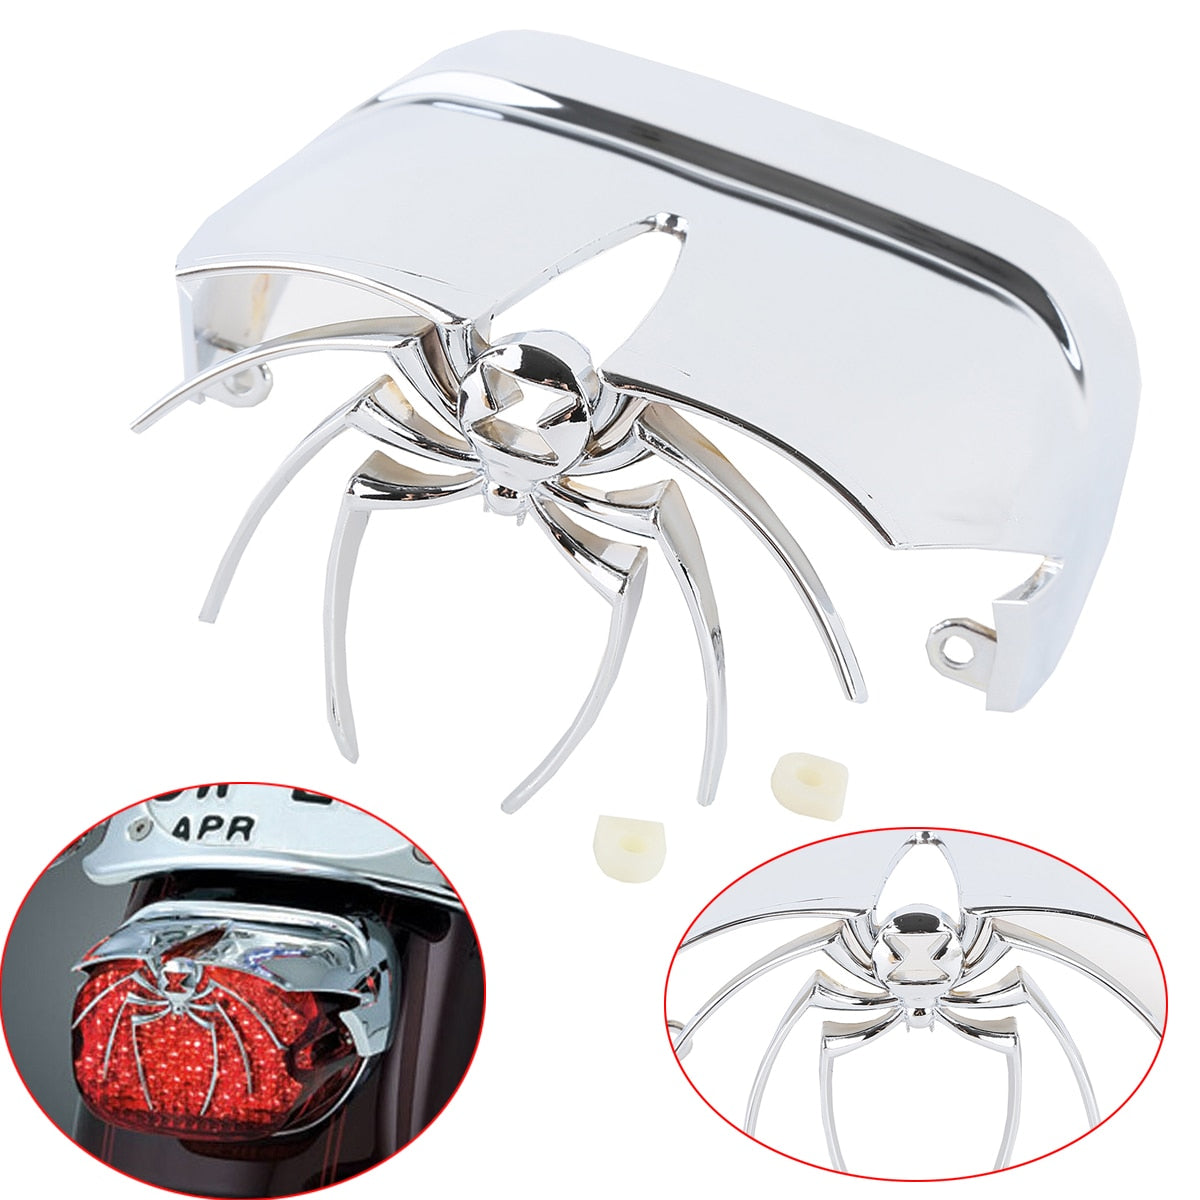 Voodoo Cycle House Custom 3-D Spider Rear Tail Light Cover For Various Harley-Davidson Models